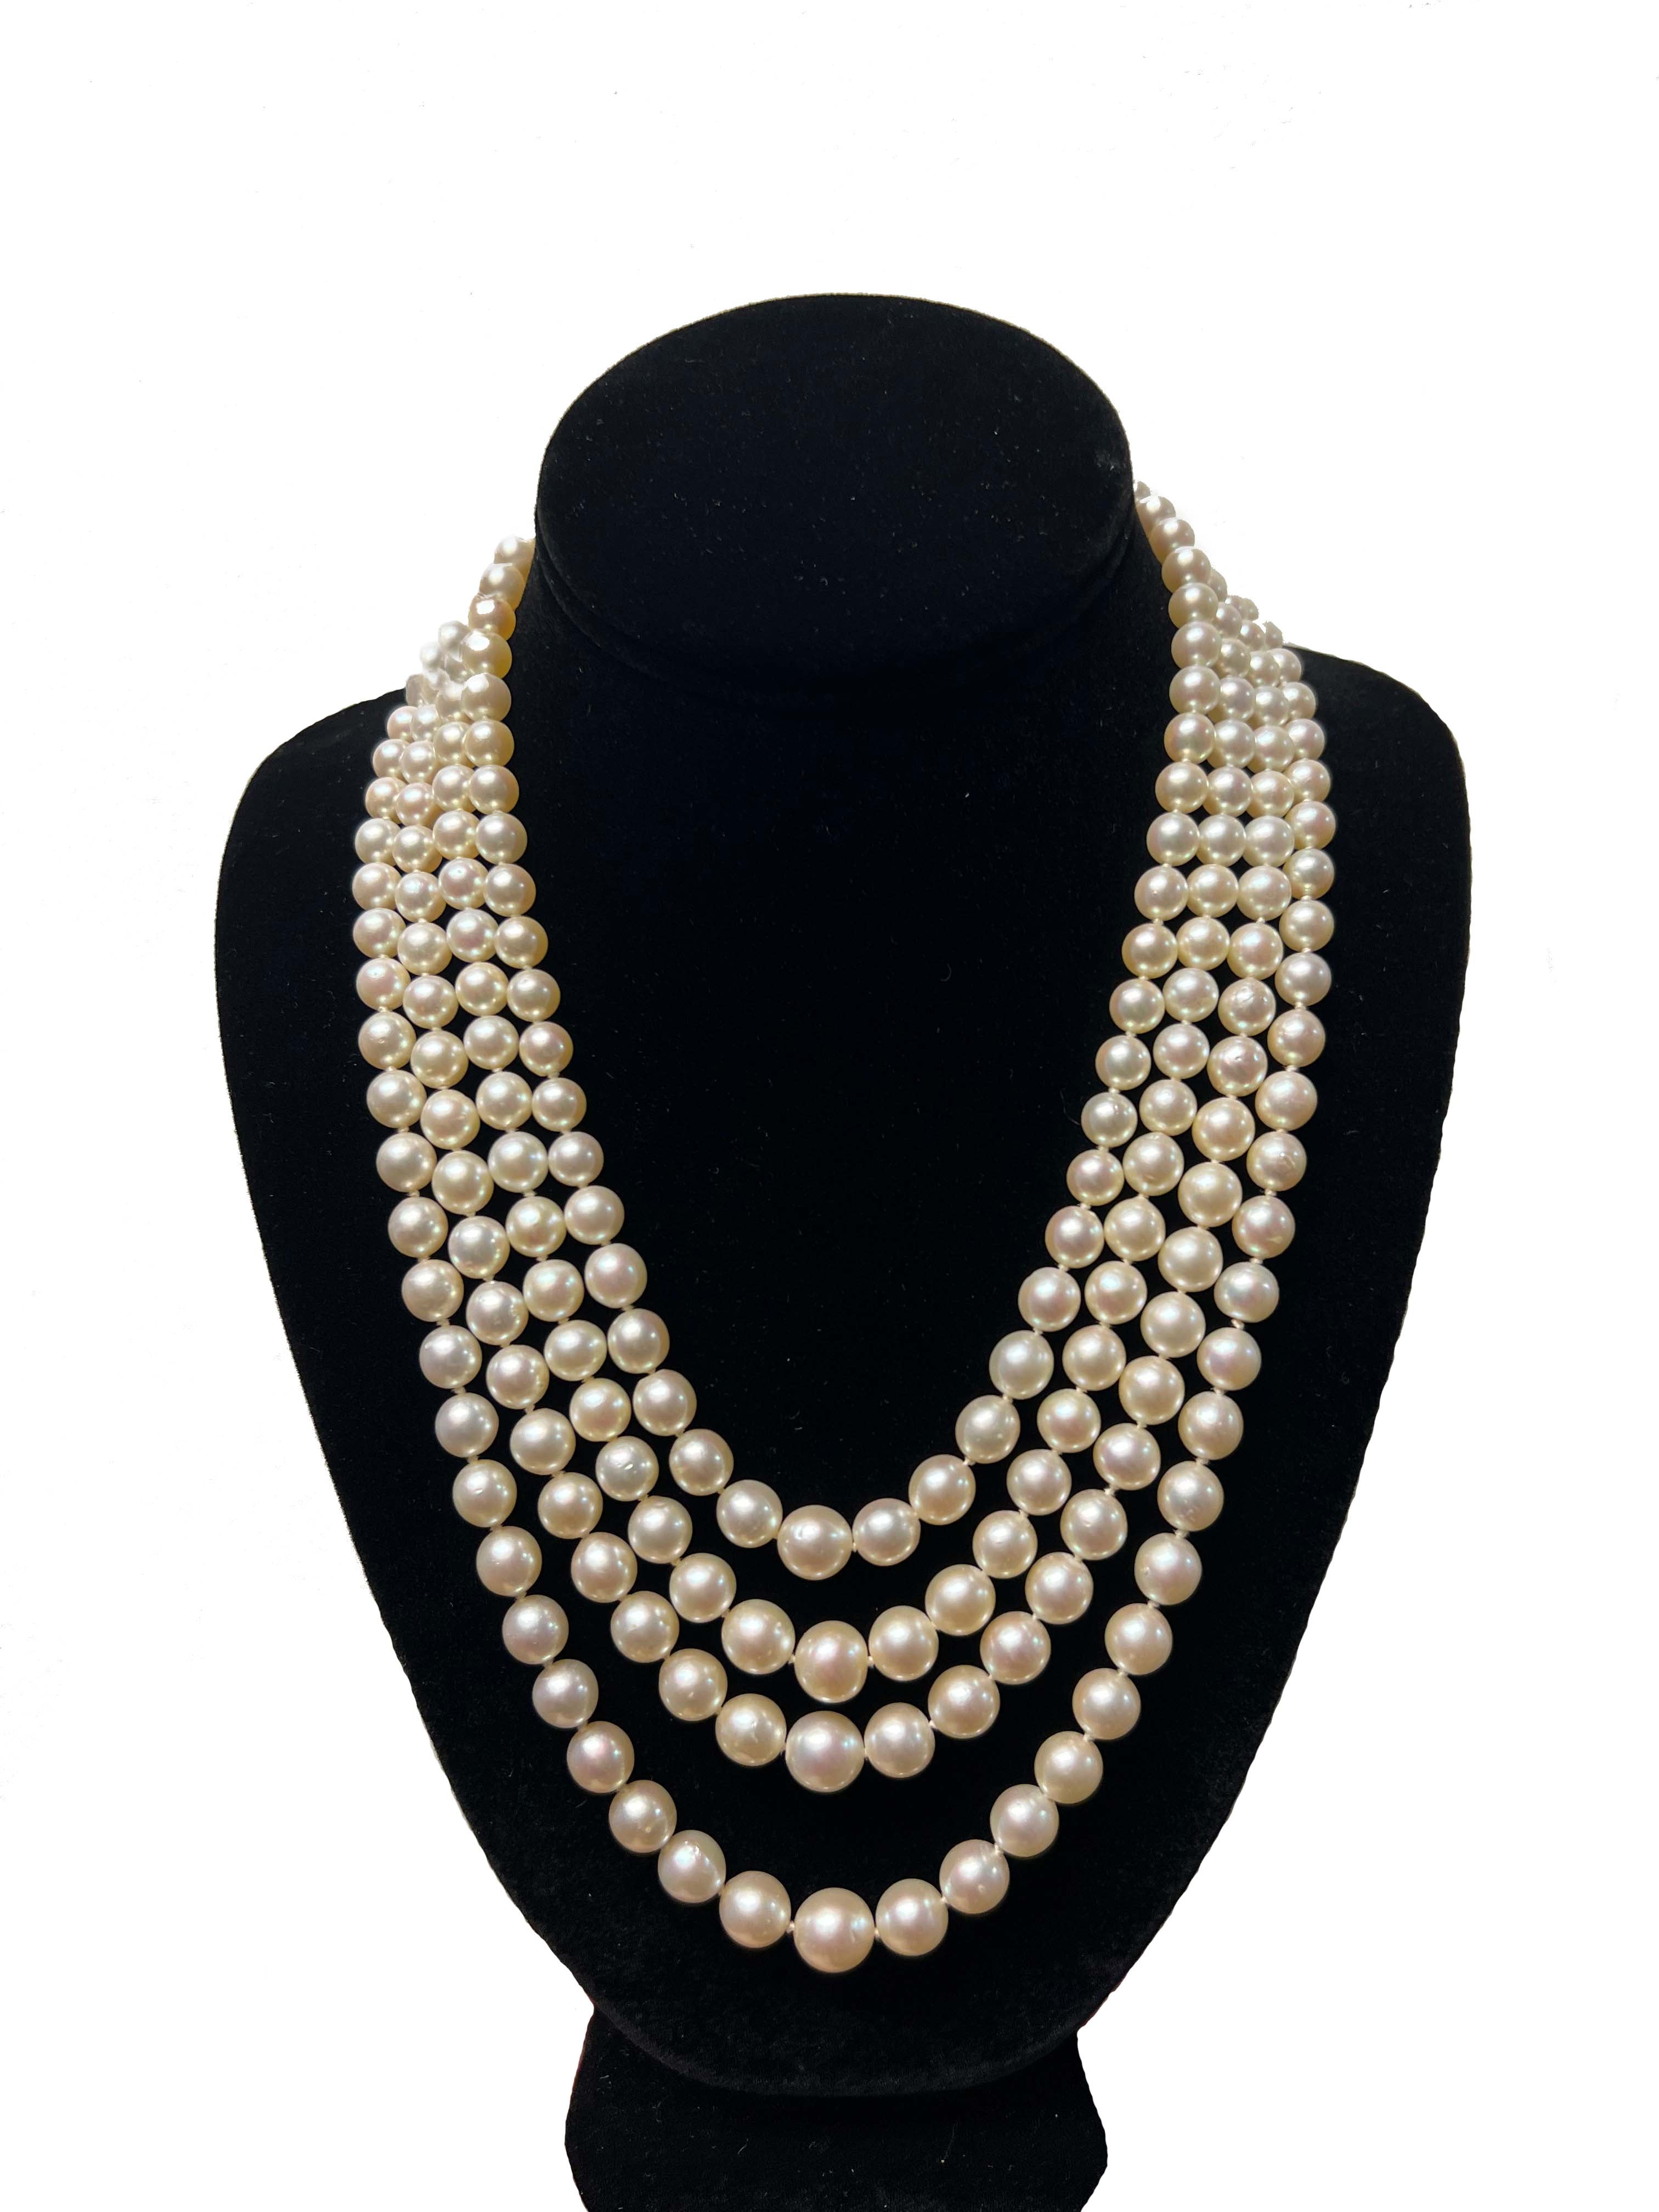 example of cultured pearls